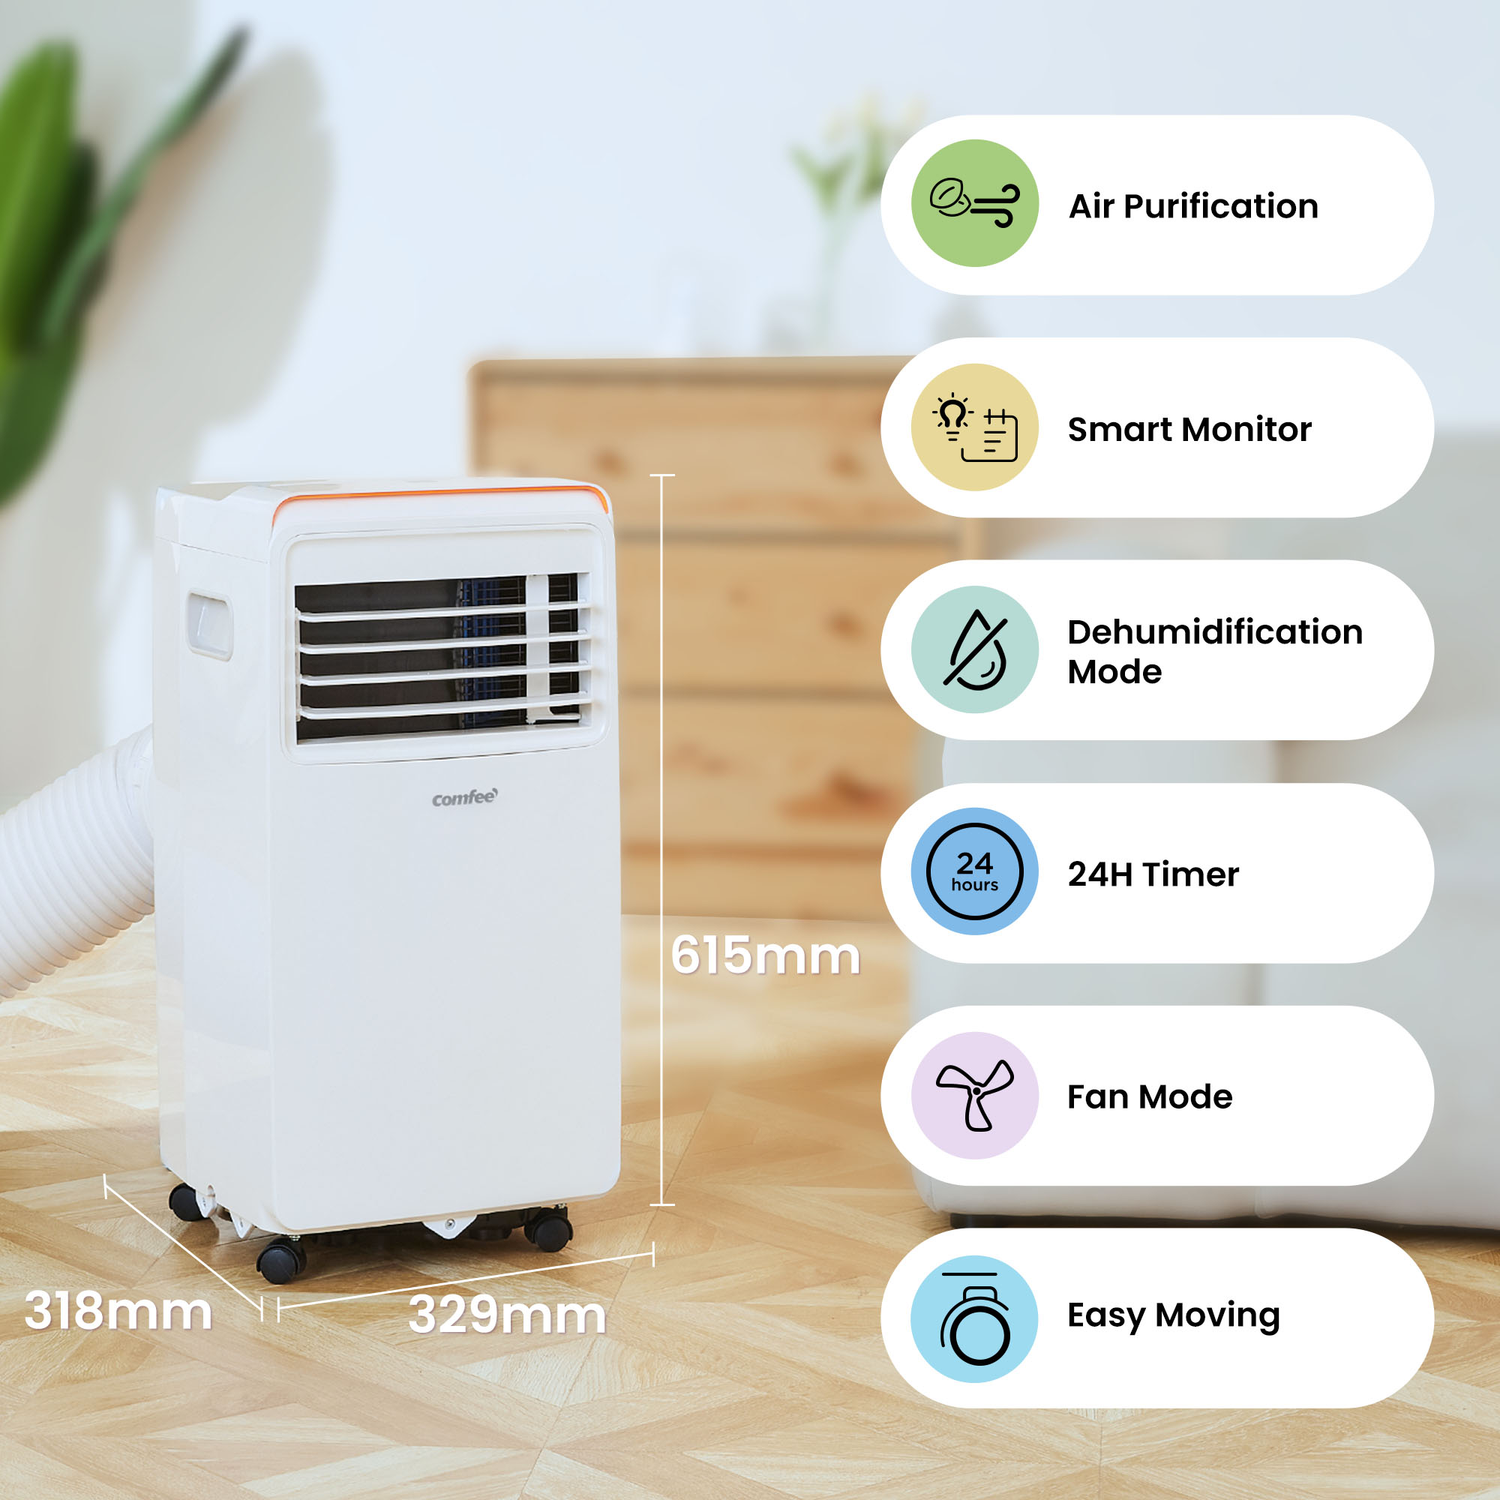 Comfee Mobile 3-in-1 Air Conditioner - Ventilator - Air dehumidifier - 7000 BTU/h With Remote Control - With Wifi